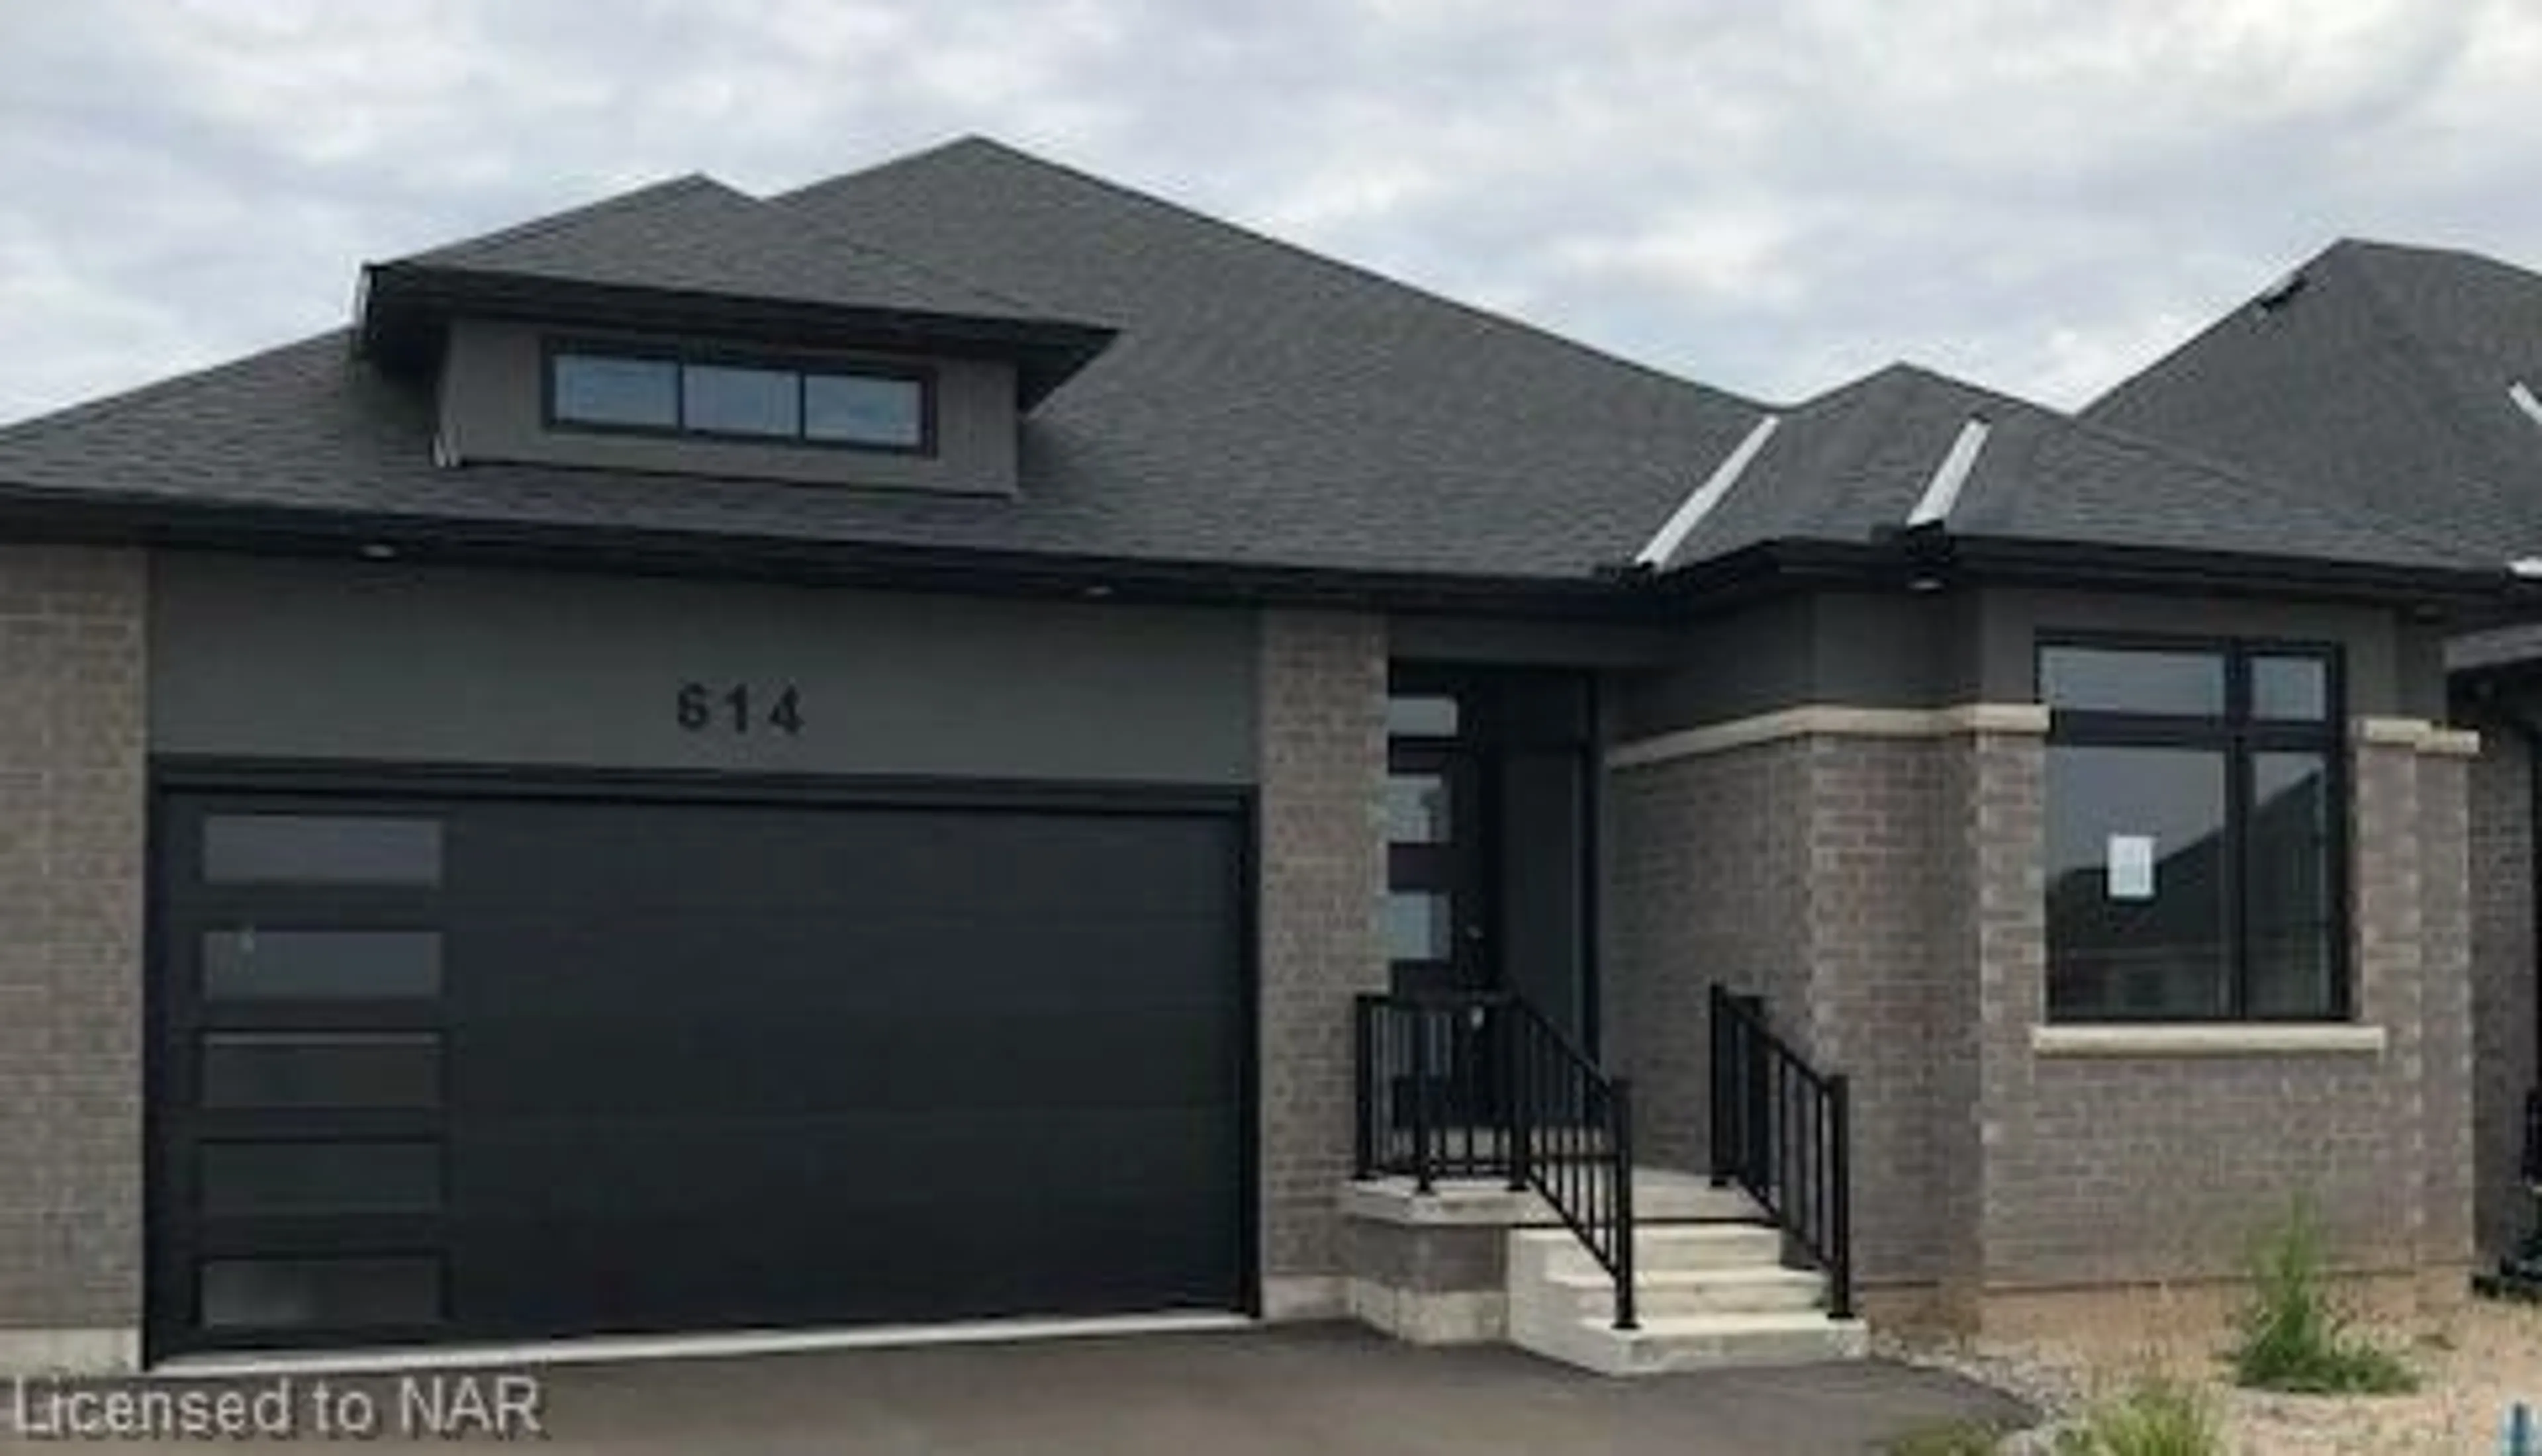 Frontside or backside of a home for 614 Old Course Trail, Welland Ontario L3B 0L8